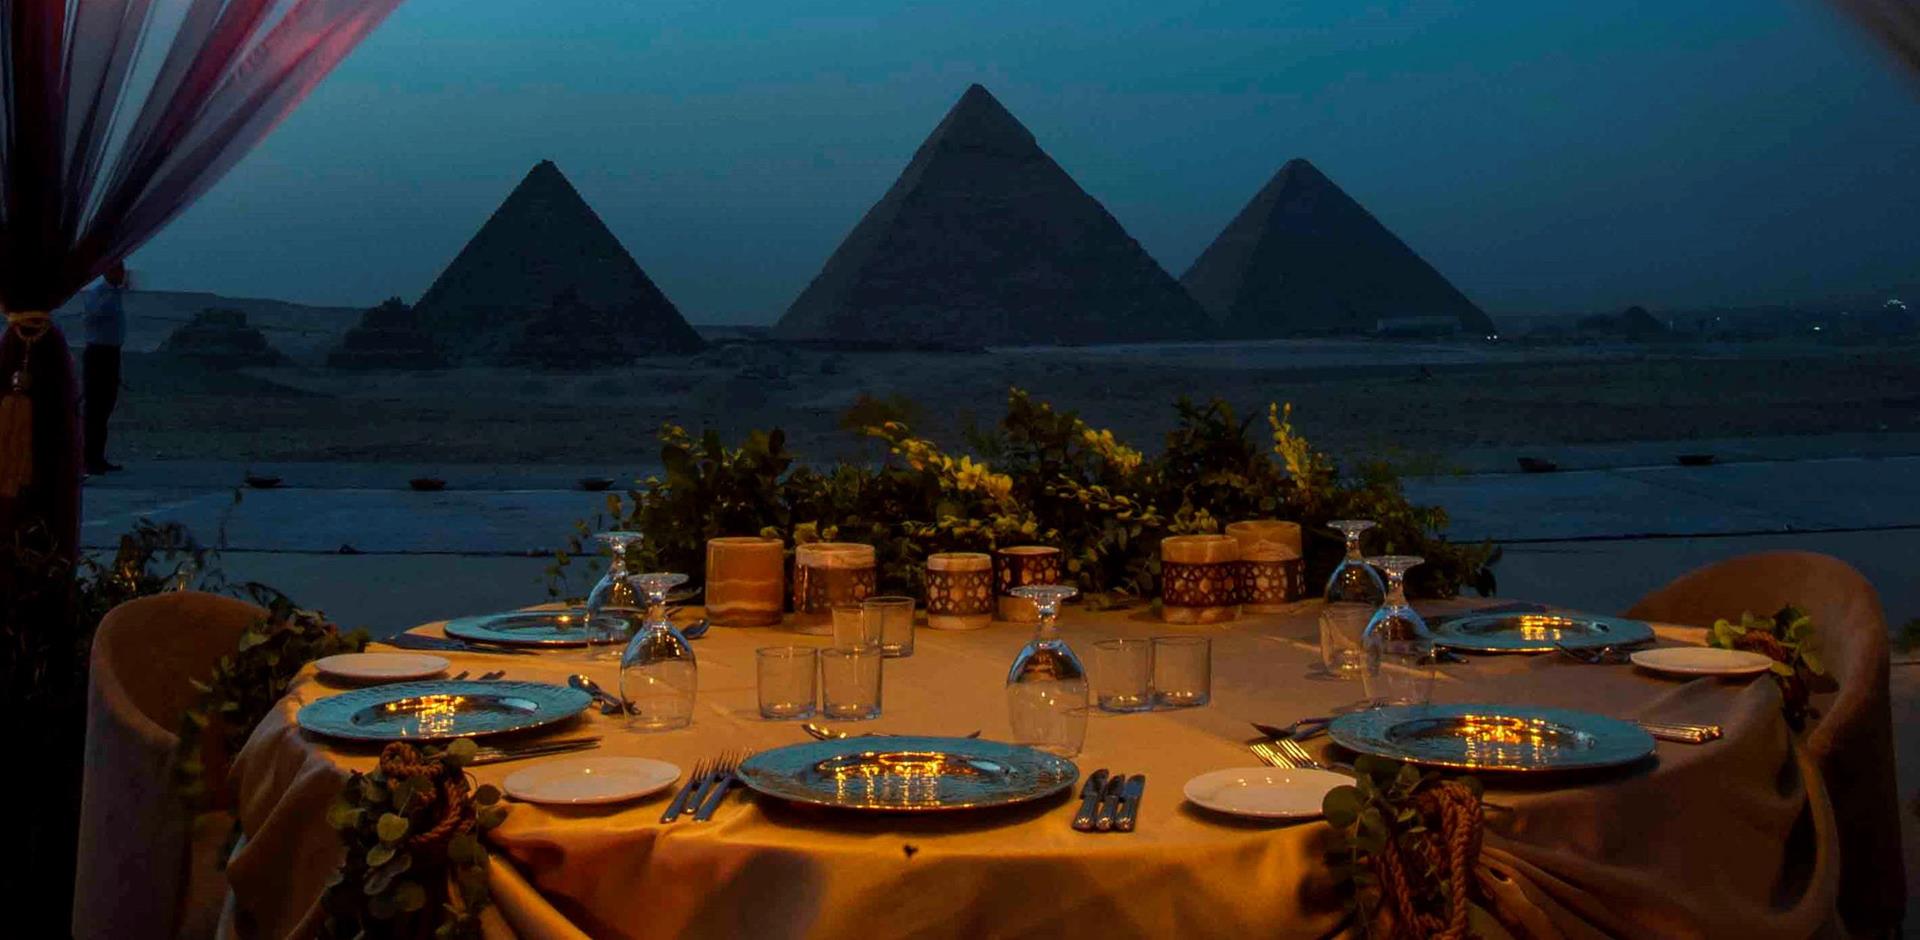 Evening, Private dinner at the Pyramids, Egypt